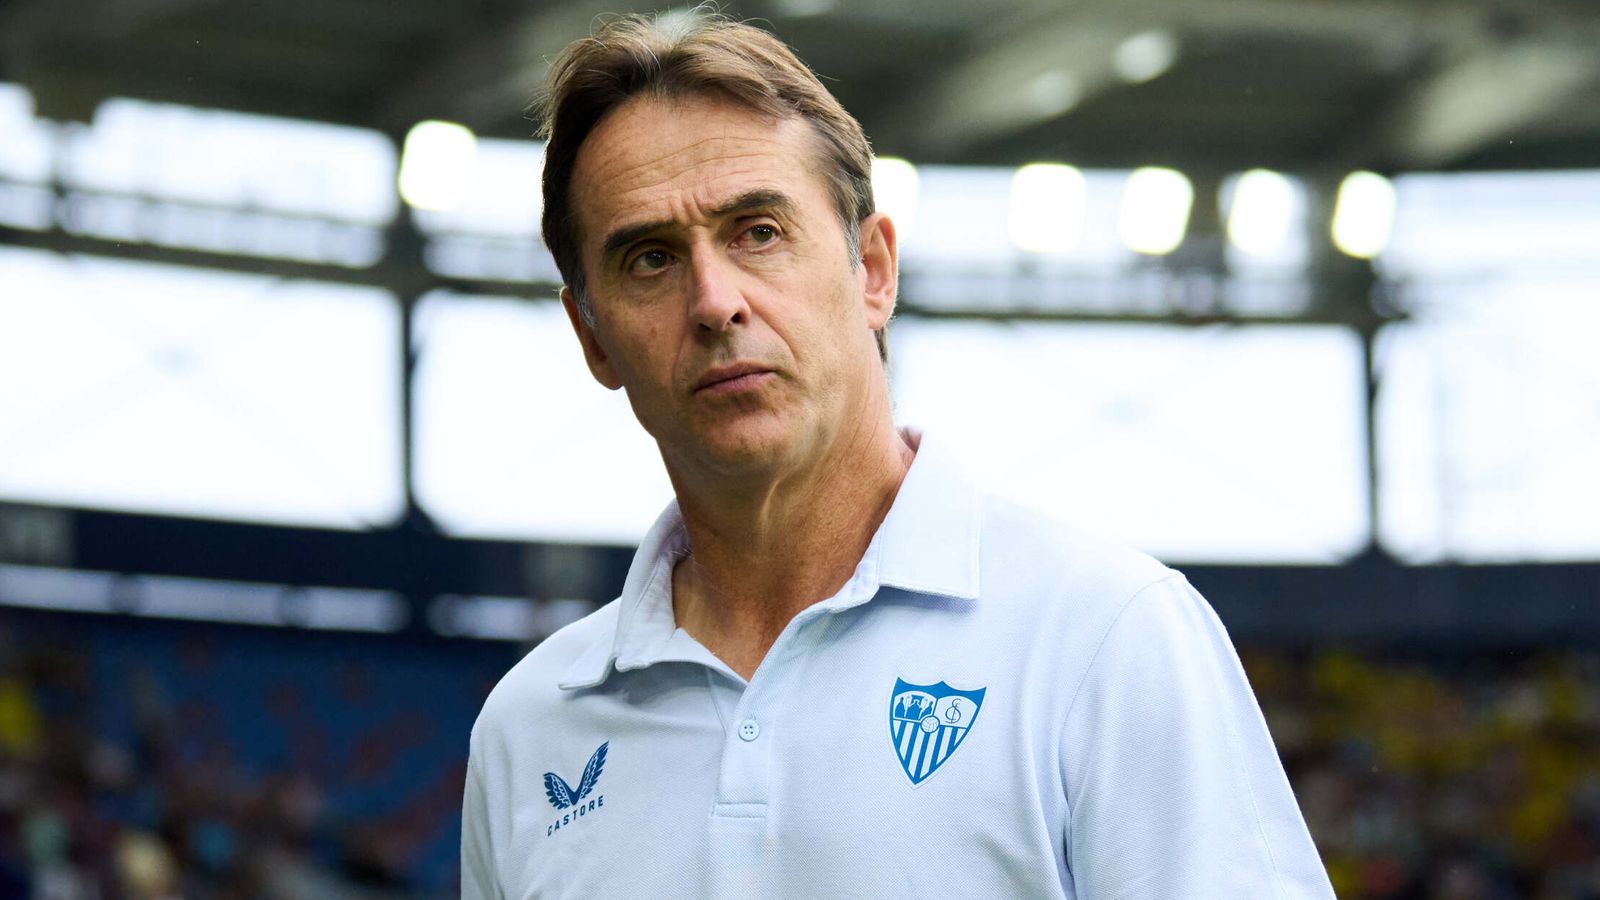 Wolves: Sevilla head coach Julen Lopetegui preferred candidate to replace Bruno Lage at Molineux | Football News